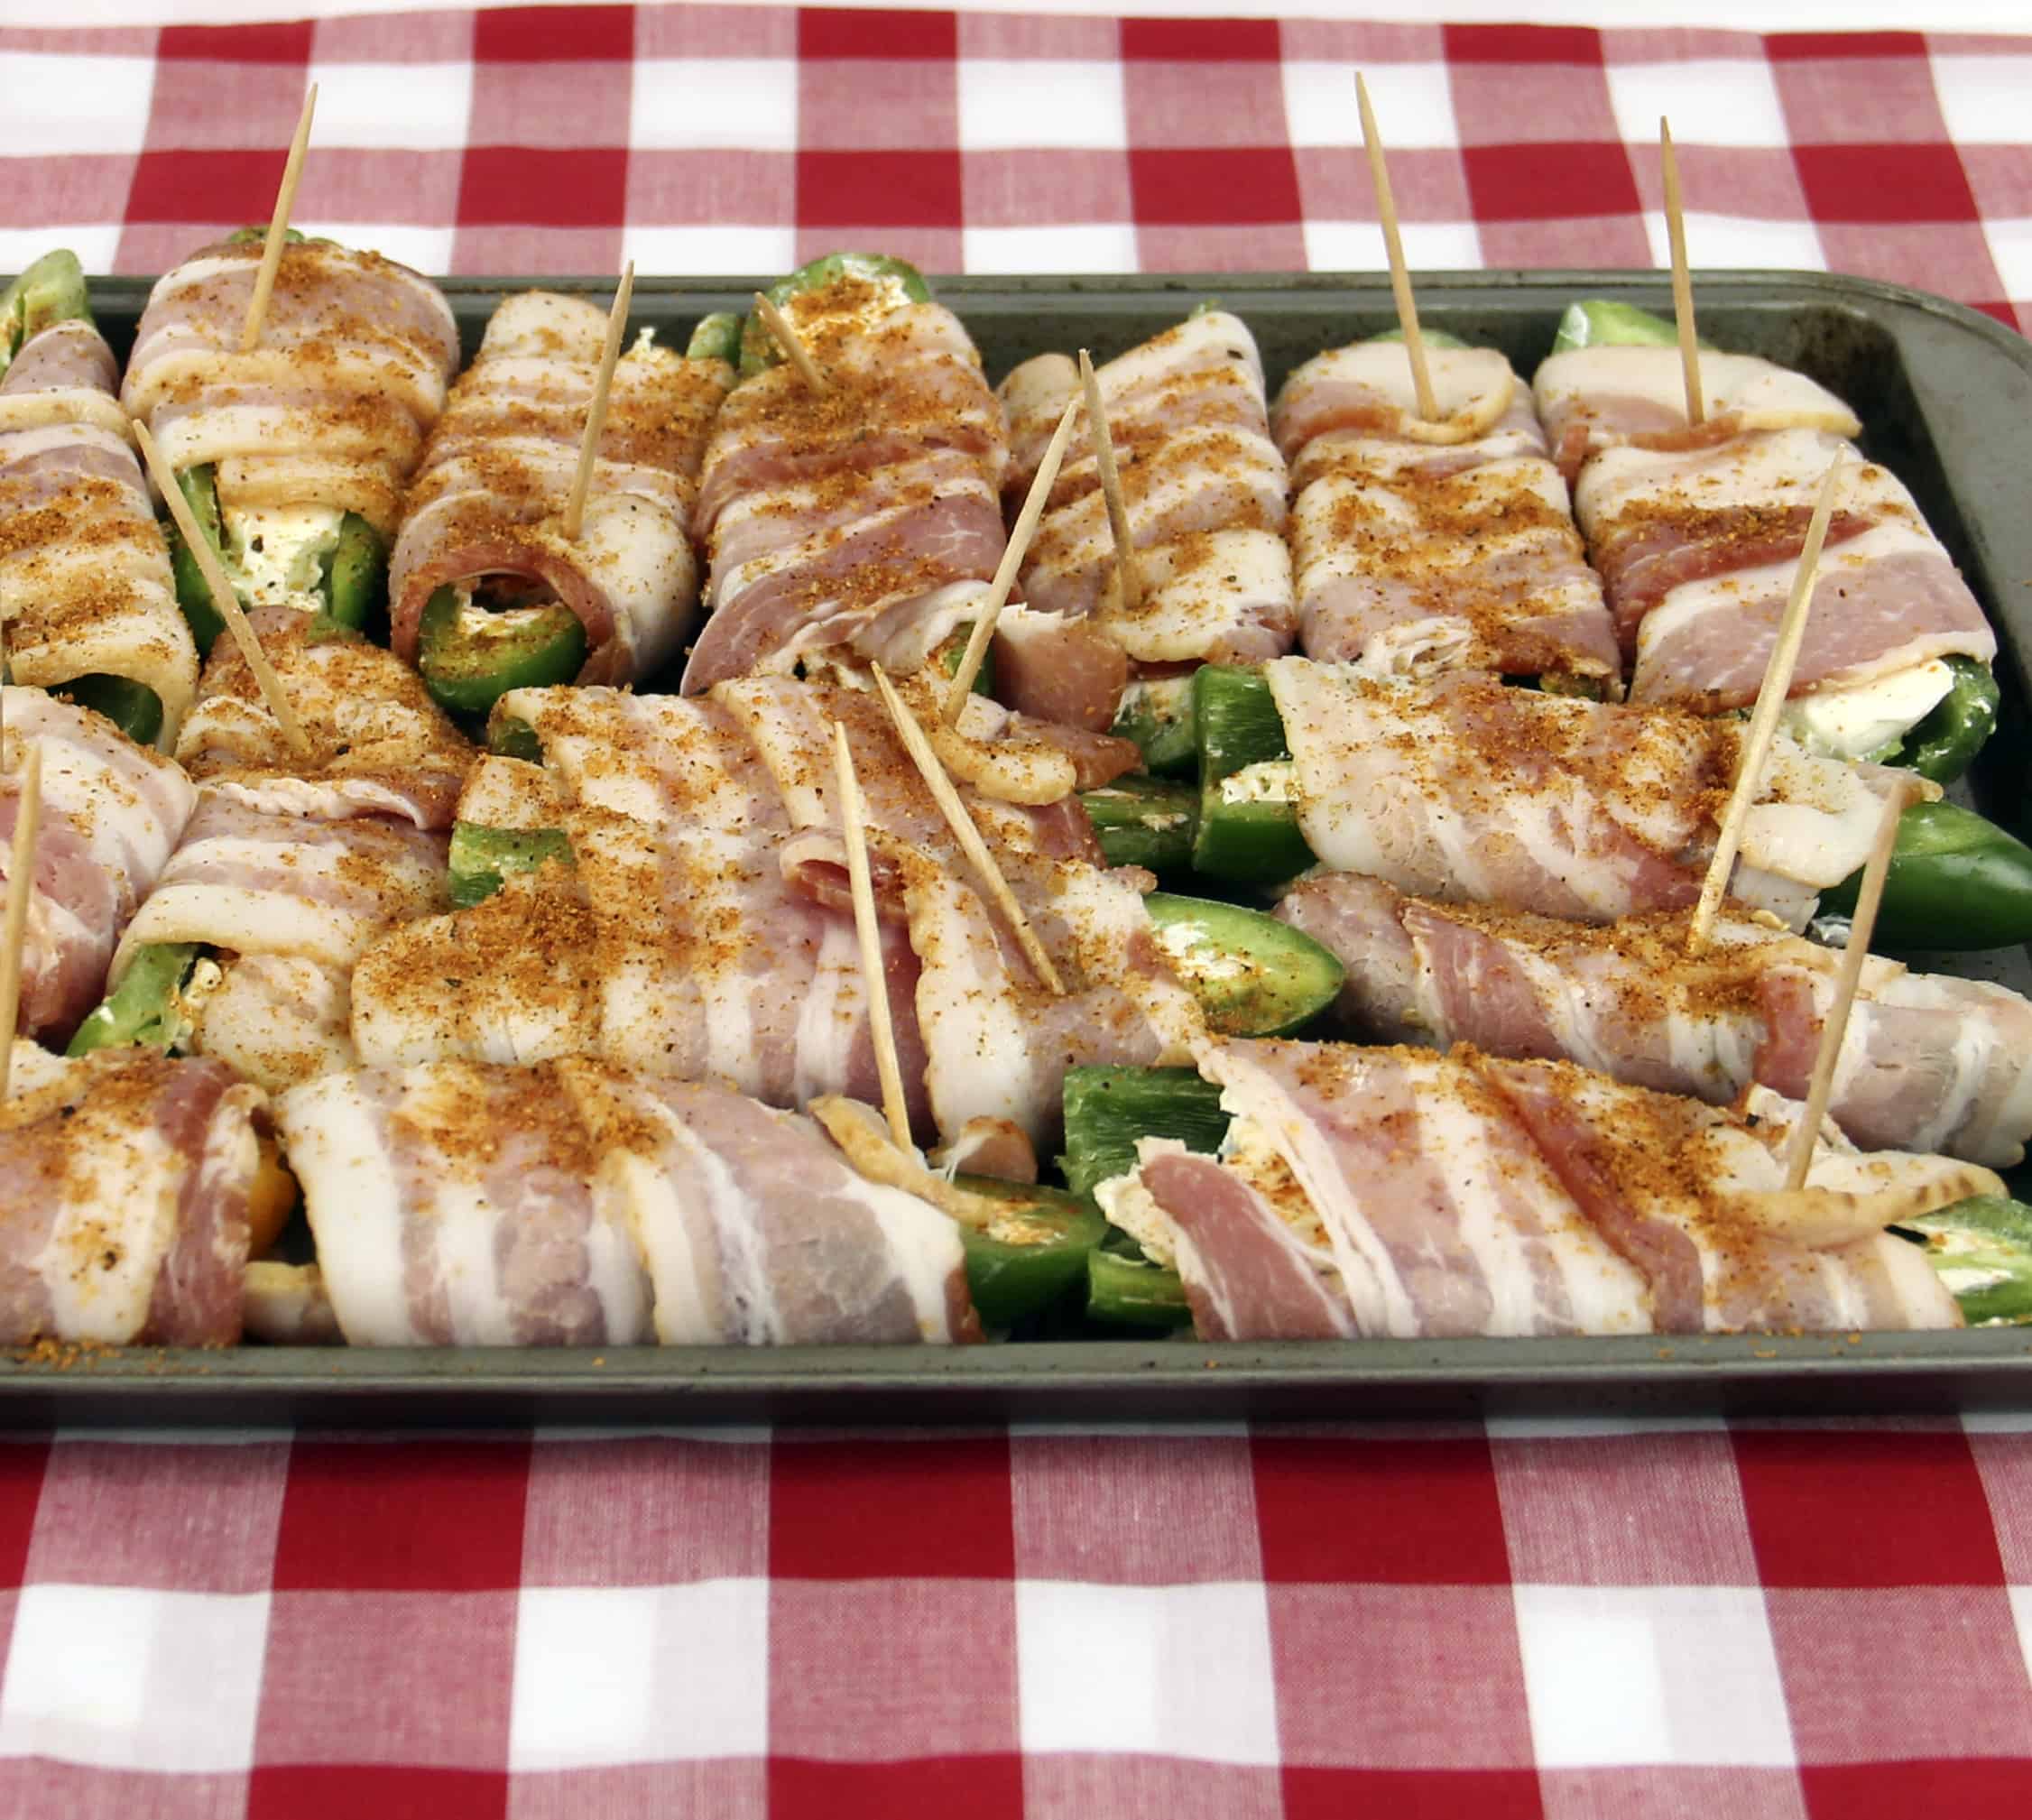 Jalapeno Peppers wrapped in bacon